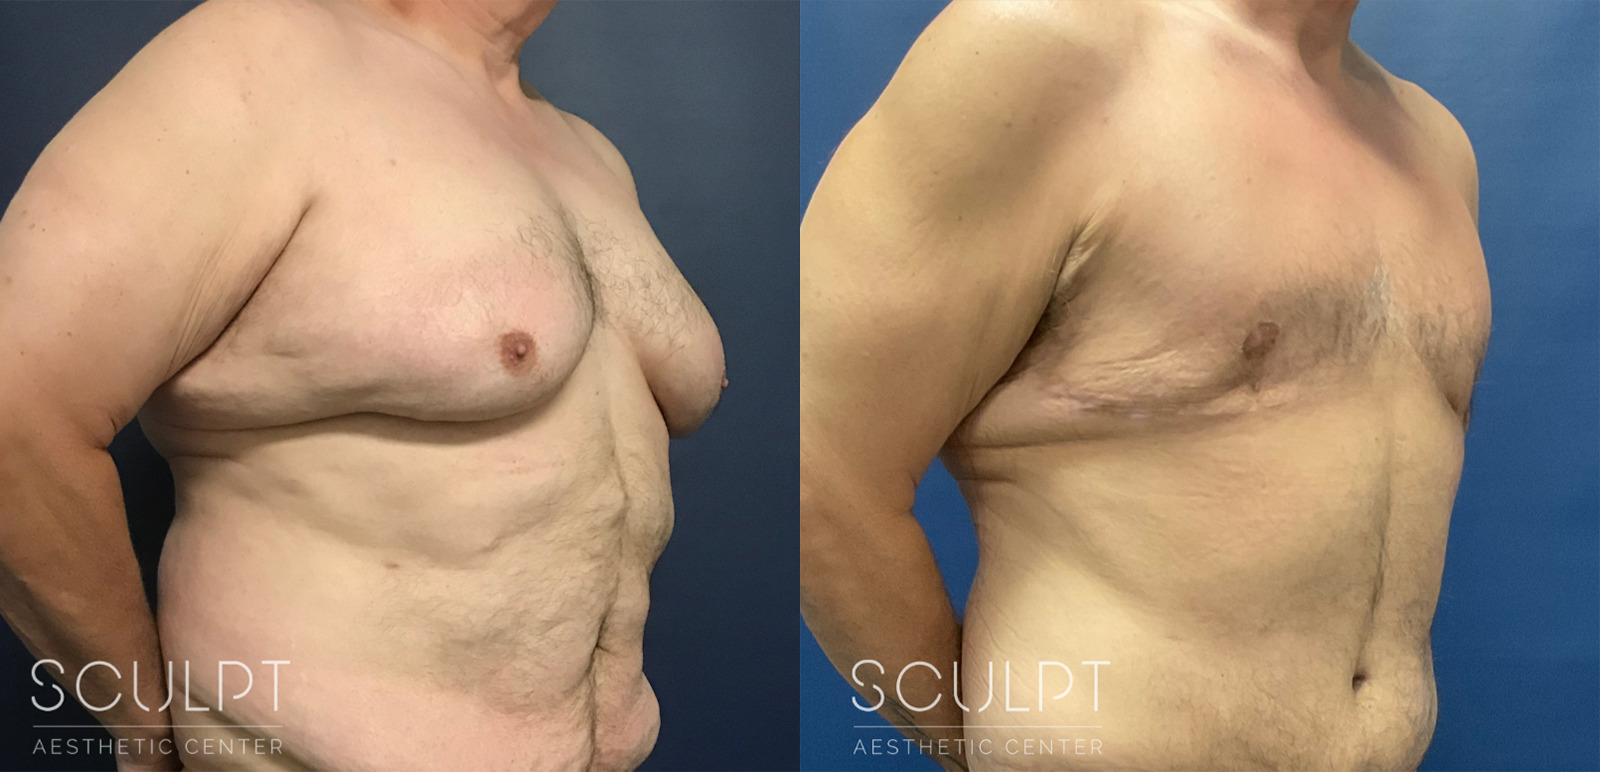 Male Skin Removal After Weight Loss Before and After Photo by Sculpt Aesthetic Center in Frisco, TX